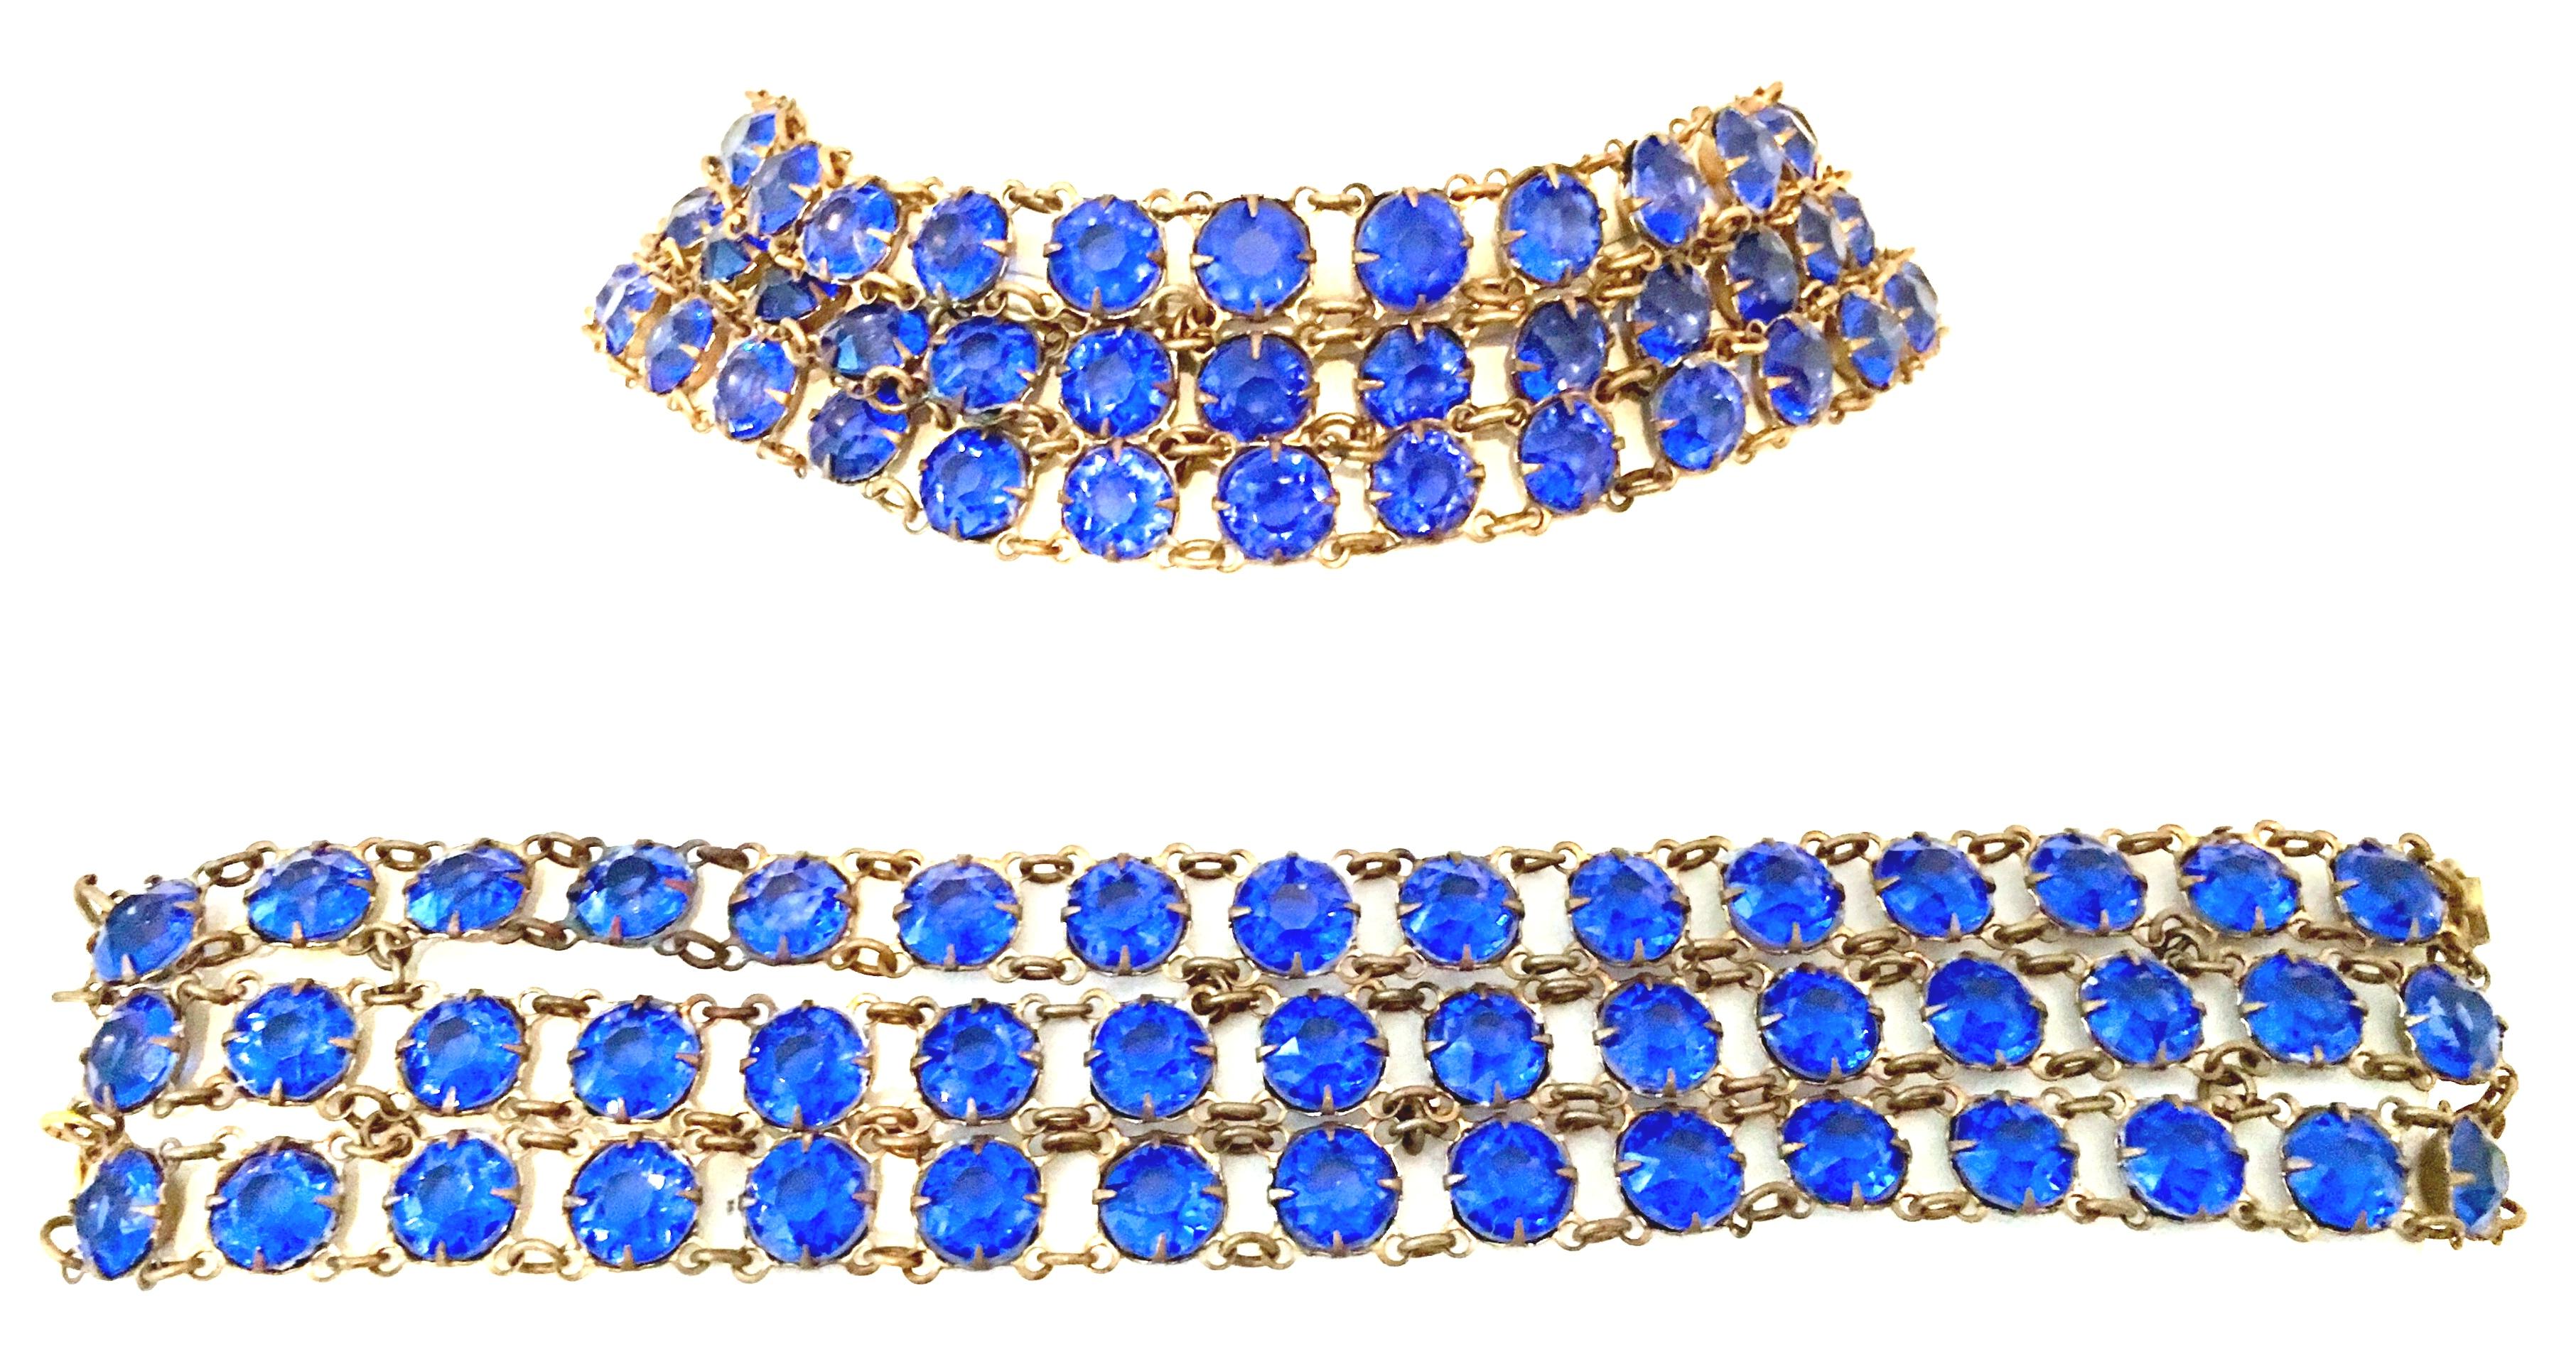 Antique European Sapphire Blue Faceted Glass & Gold Brass Multi - Strand Choker Style Necklace And Bracelet Set. Each piece features three rows of chain link brass with open back prong set stones. The necklace is 